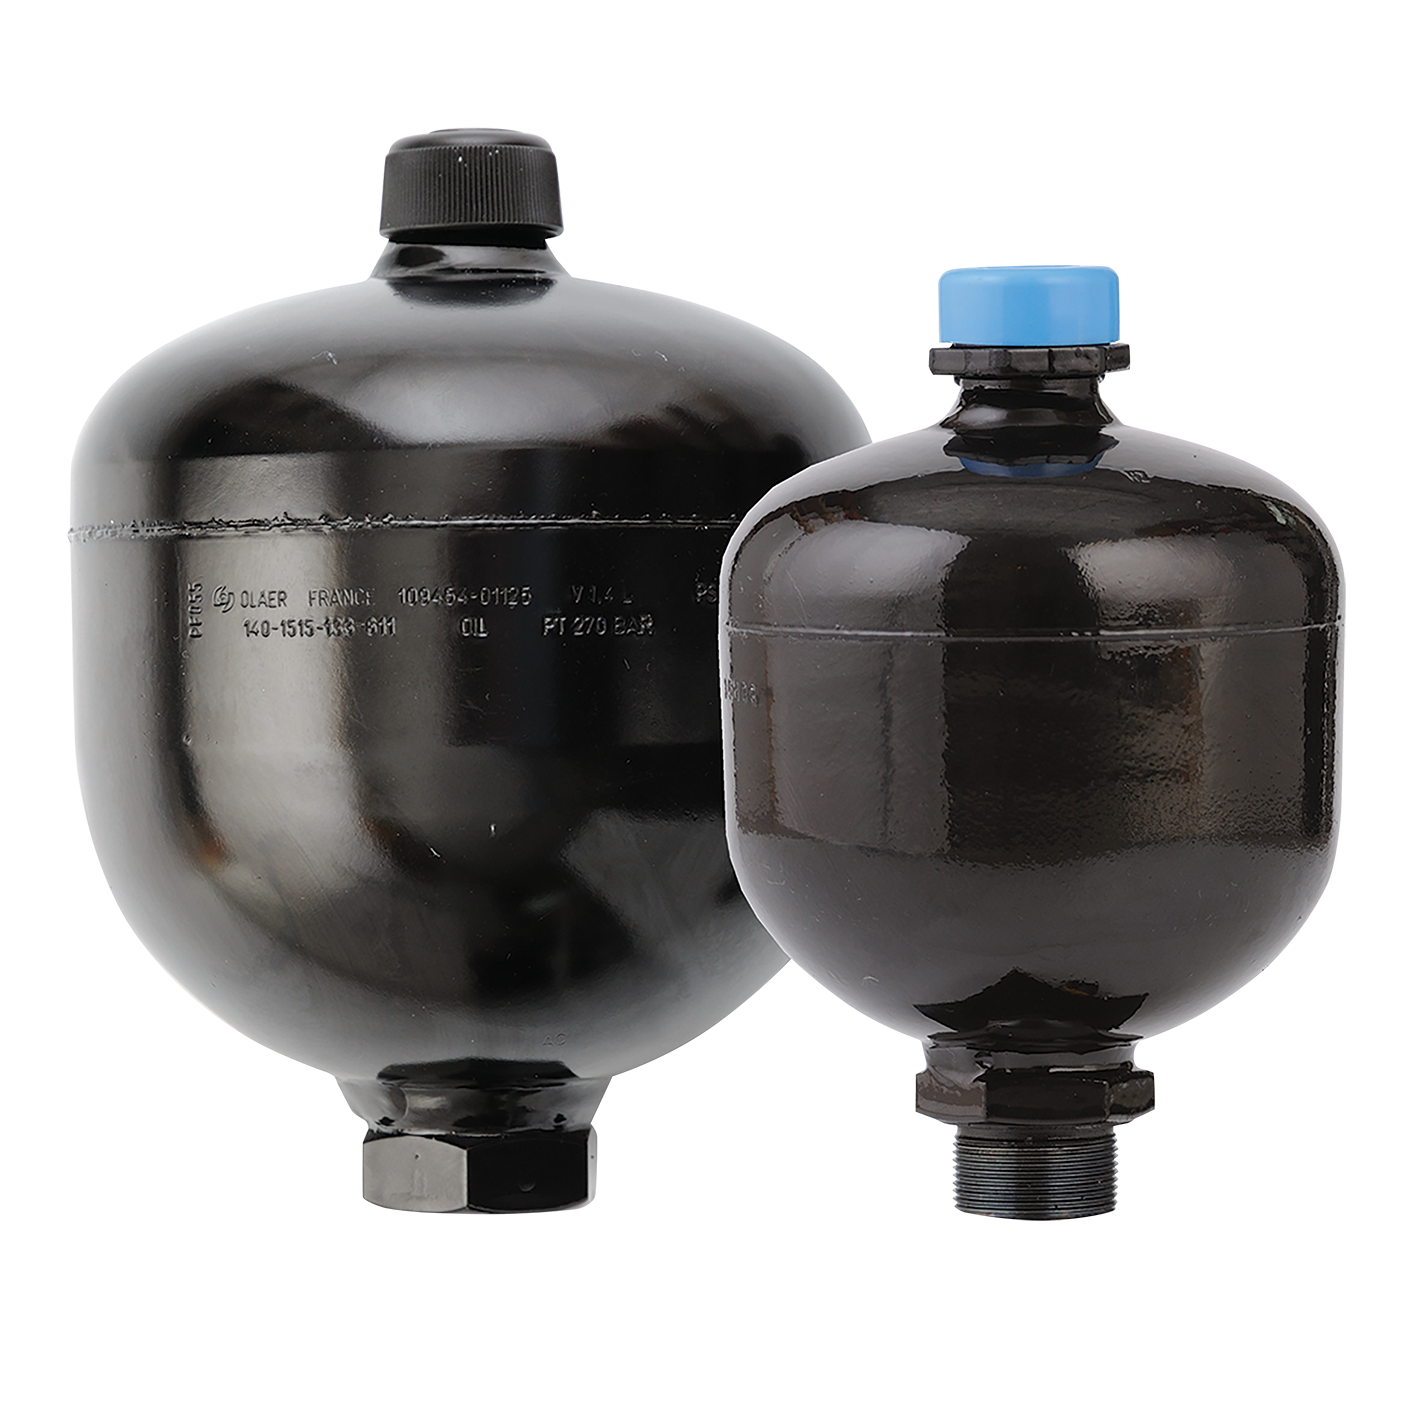 Providers of FCH DIAPHRAGM ACCUM 2.0 LITRES G3/4